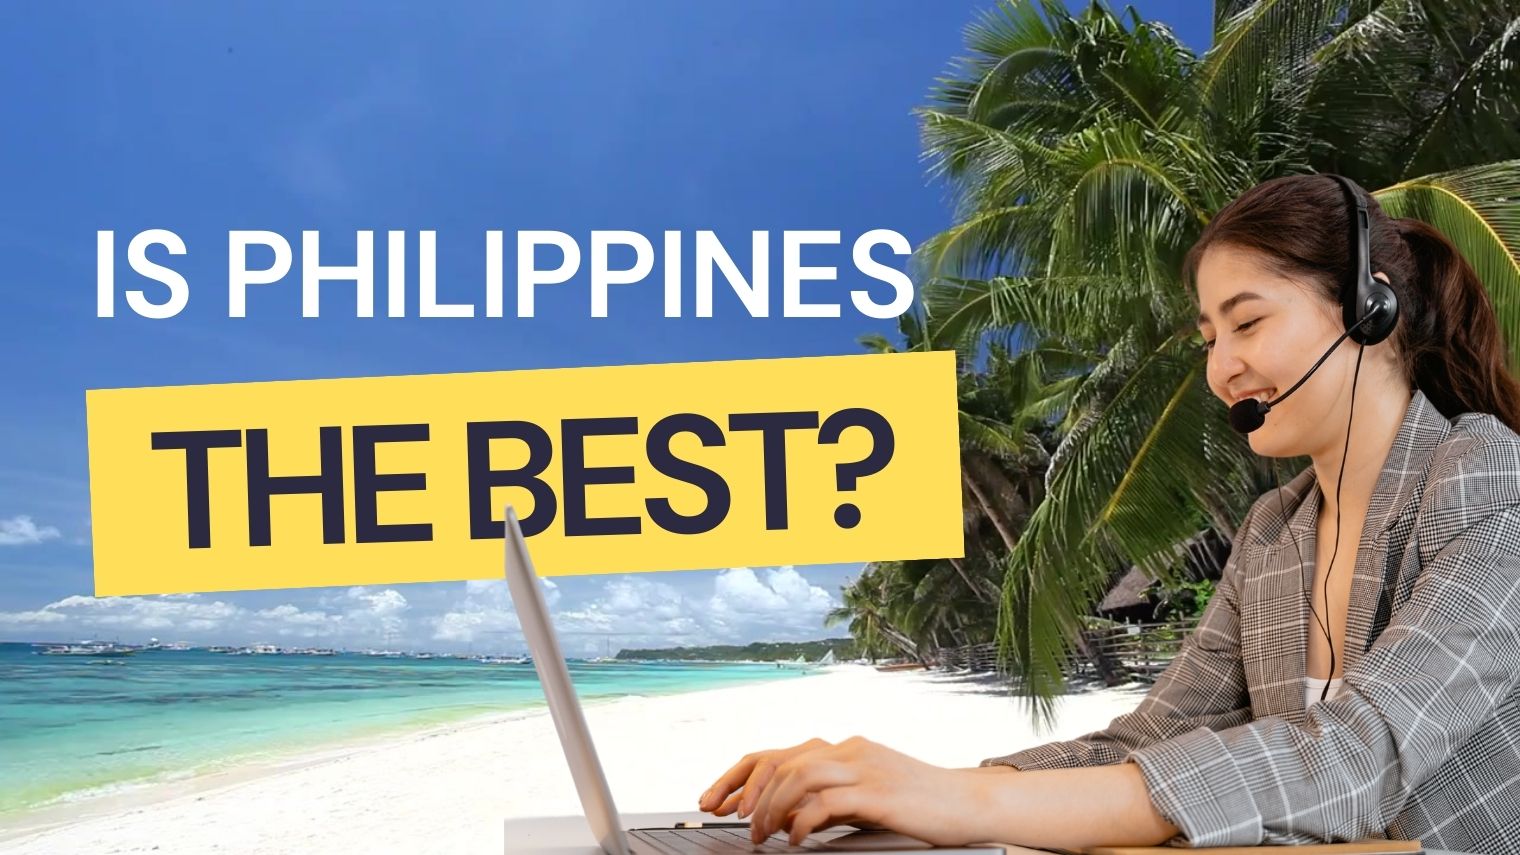 Compare the Cost-Effectiveness and Efficiency of Outsourcing to the Philippines Versus Other Popular Outsourcing Destinations